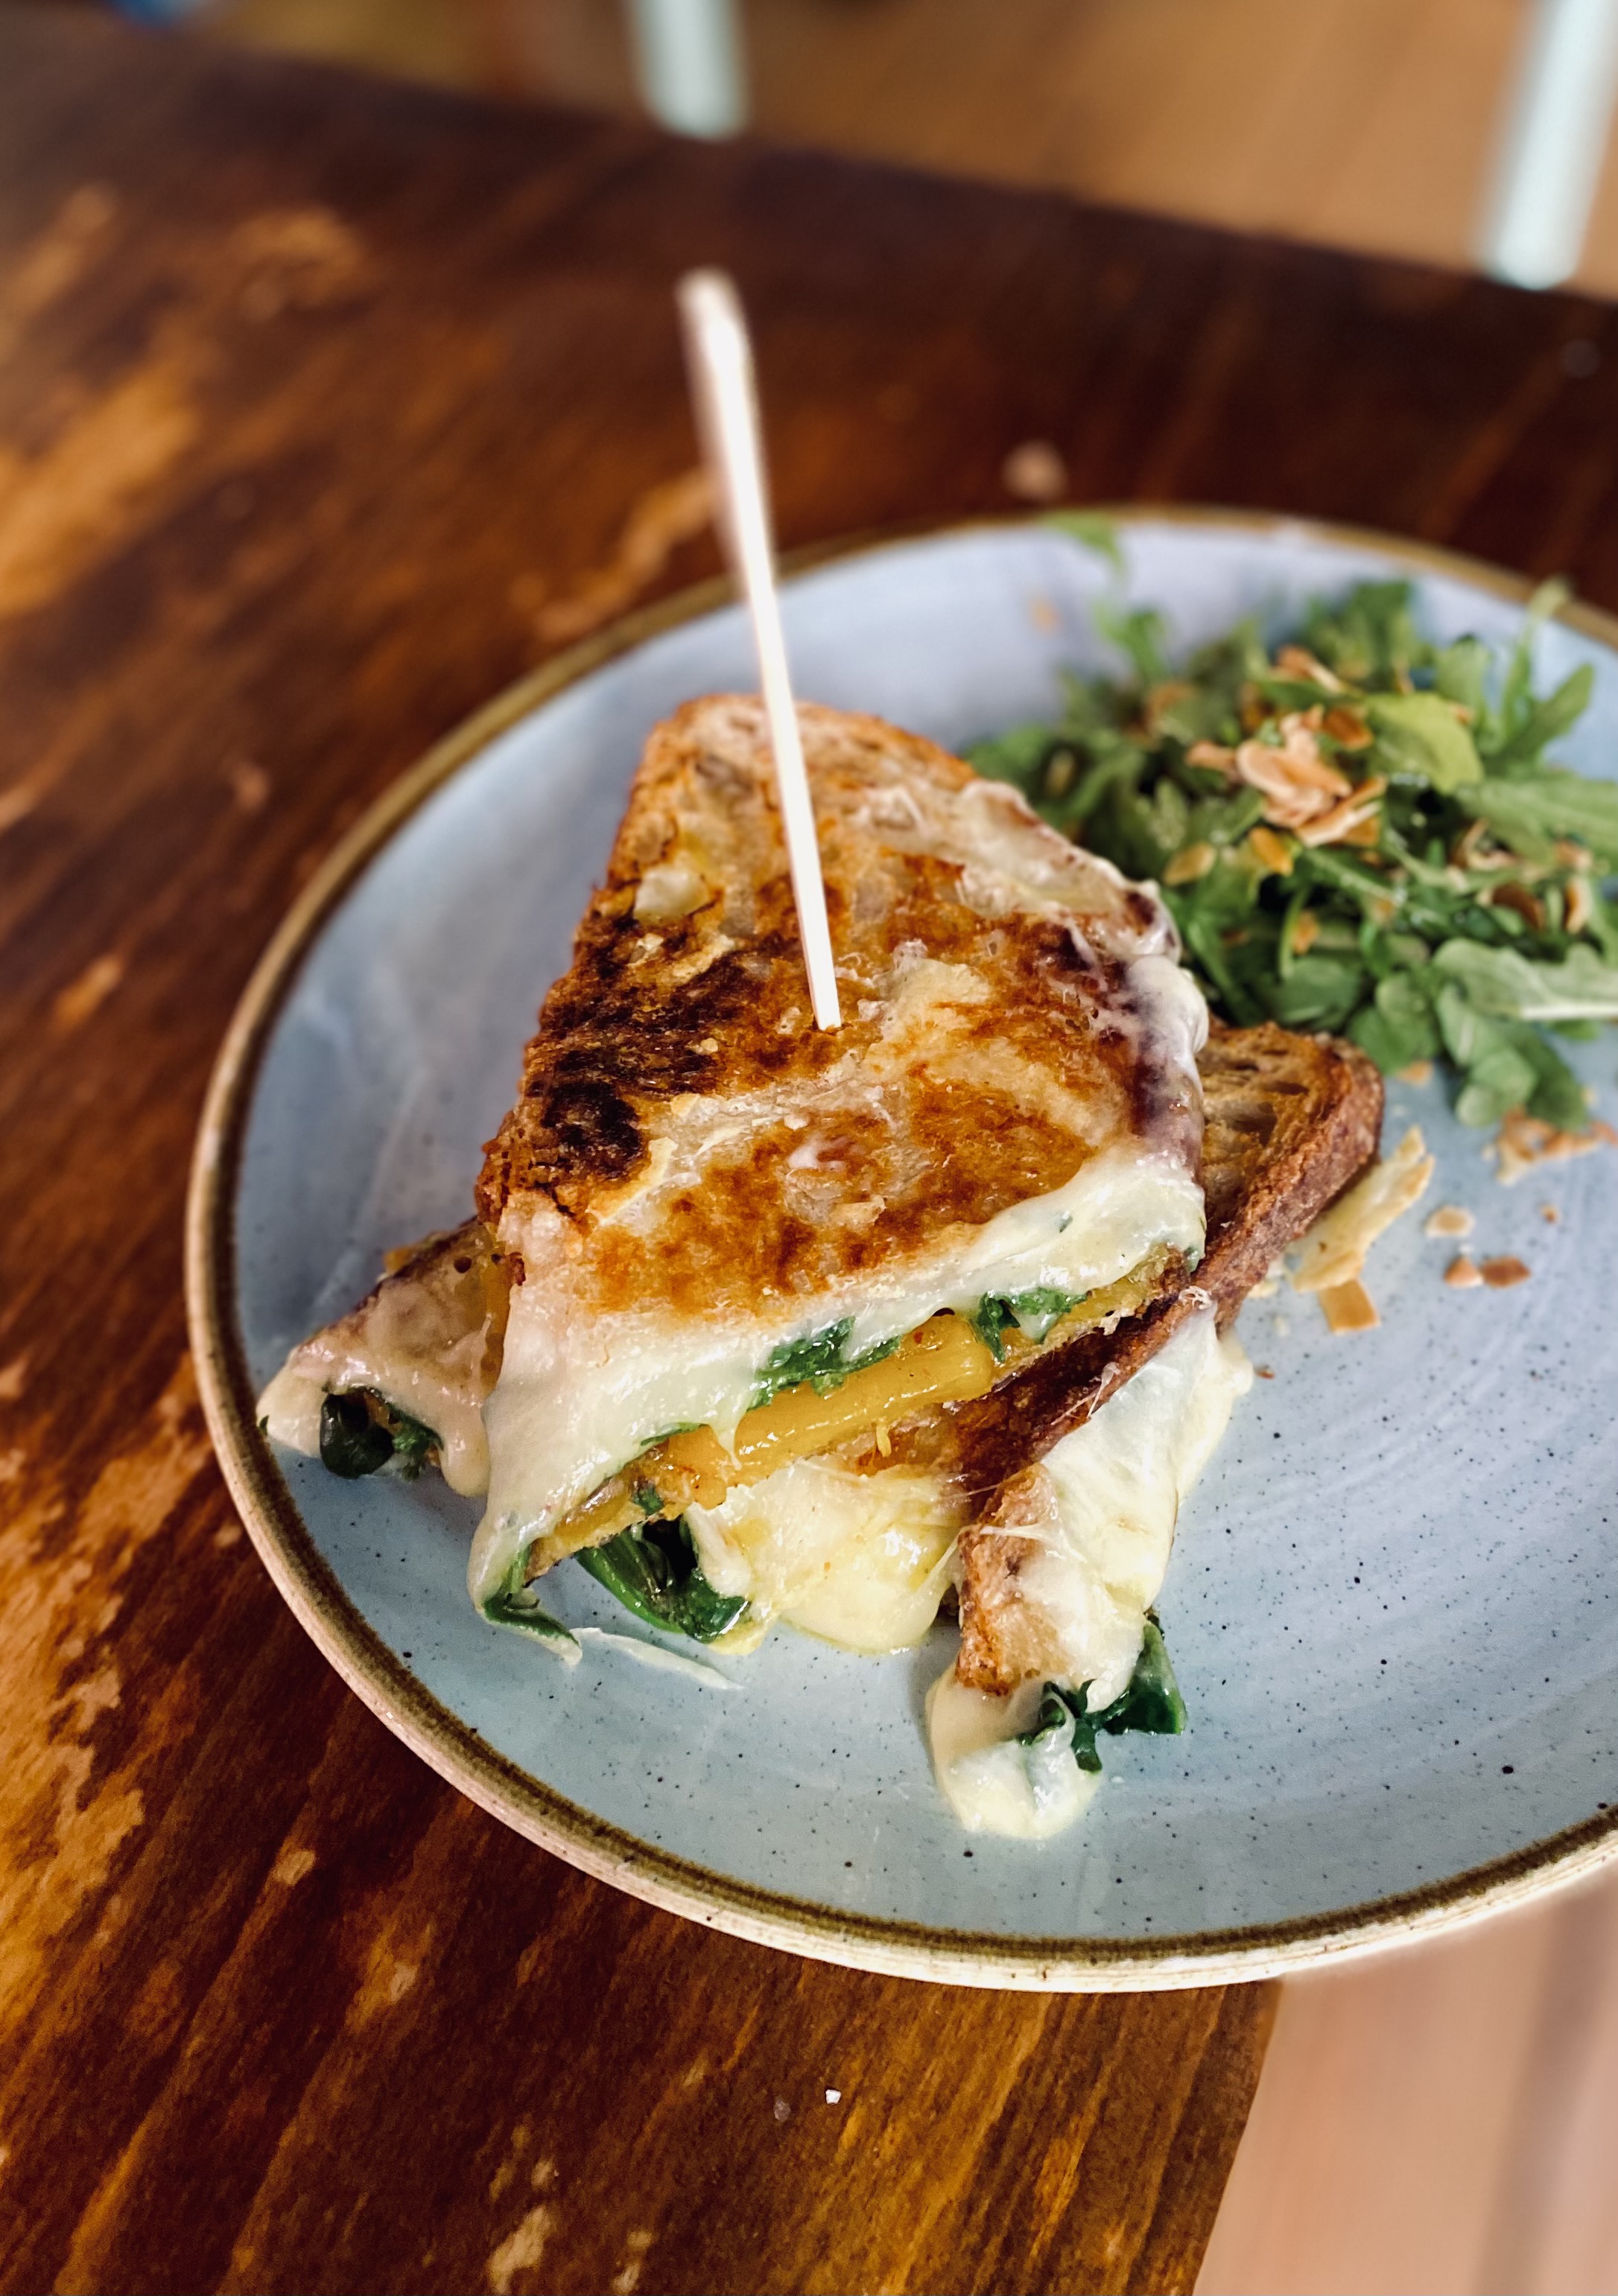 GRILLED CHEESE: Hot sandwich with a homemade sweet onion and pineapple chutney, spinach, gouda. Served with arugula